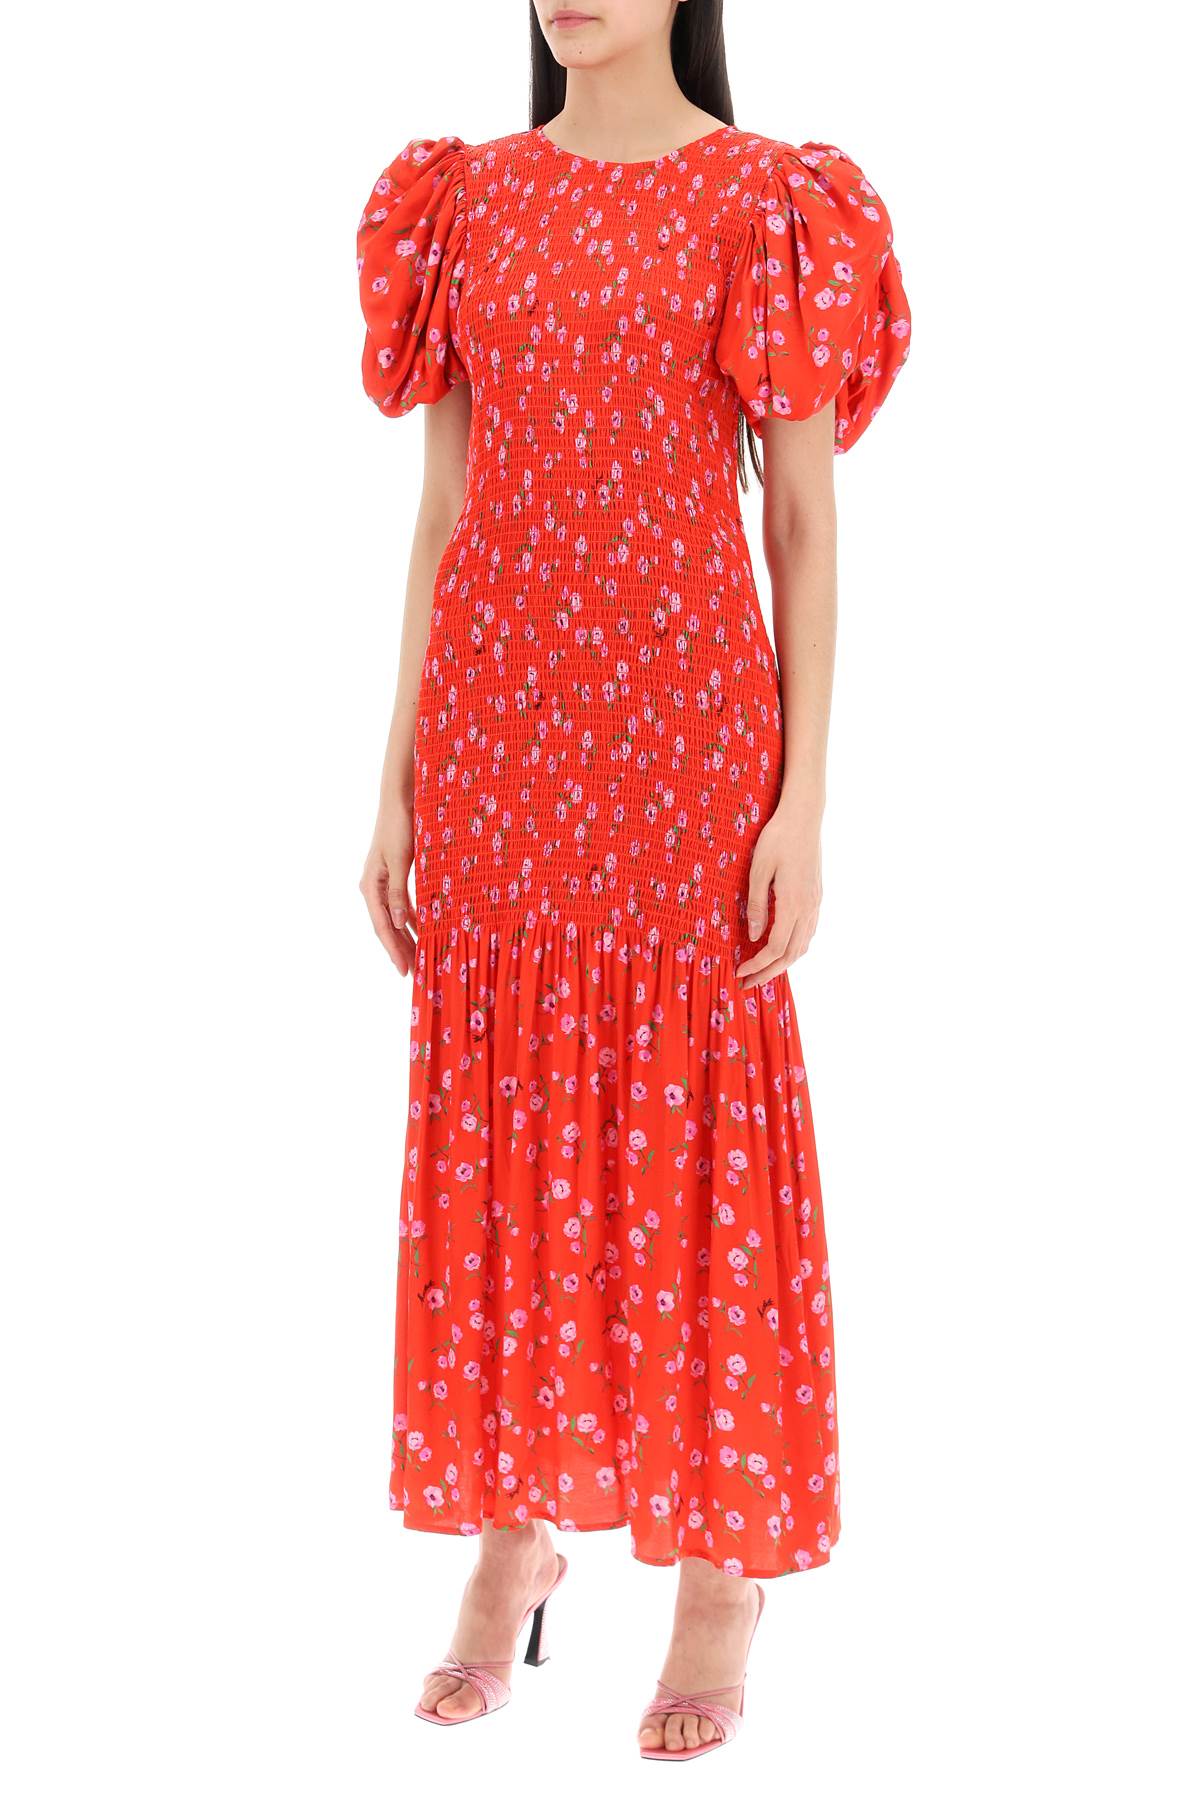 Rotate Floral Printed Maxi Dress With Puffed Sleeves In Satin Fabric-women > clothing > dresses > maxi-Rotate-36-Red-Urbanheer